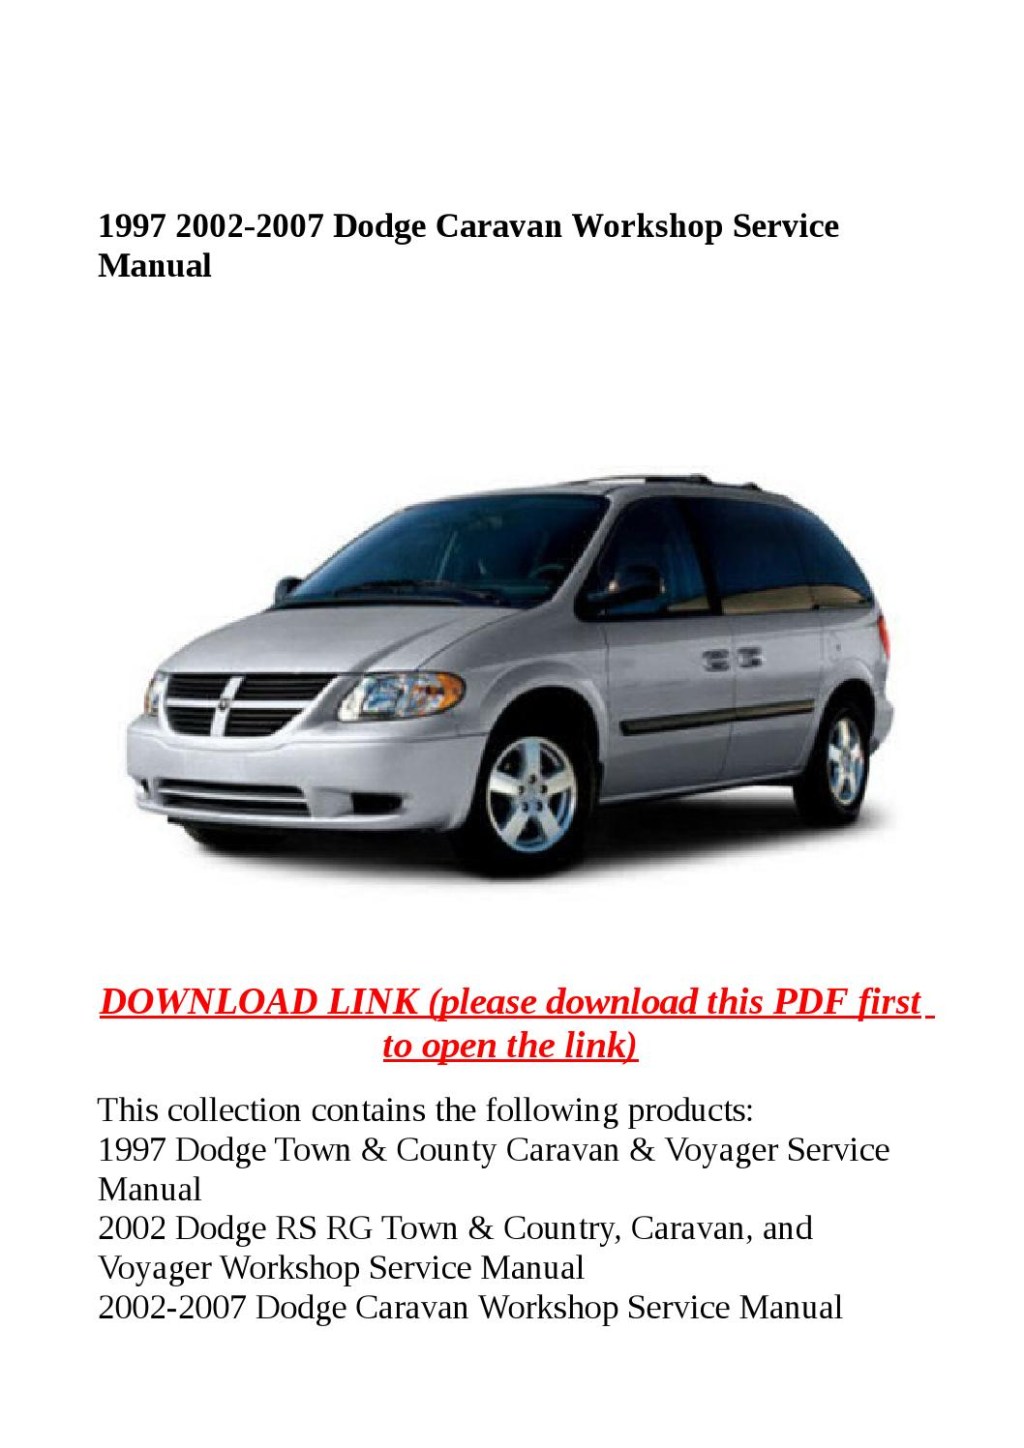 Picture of: dodge caravan workshop service manual by yghj – Issuu